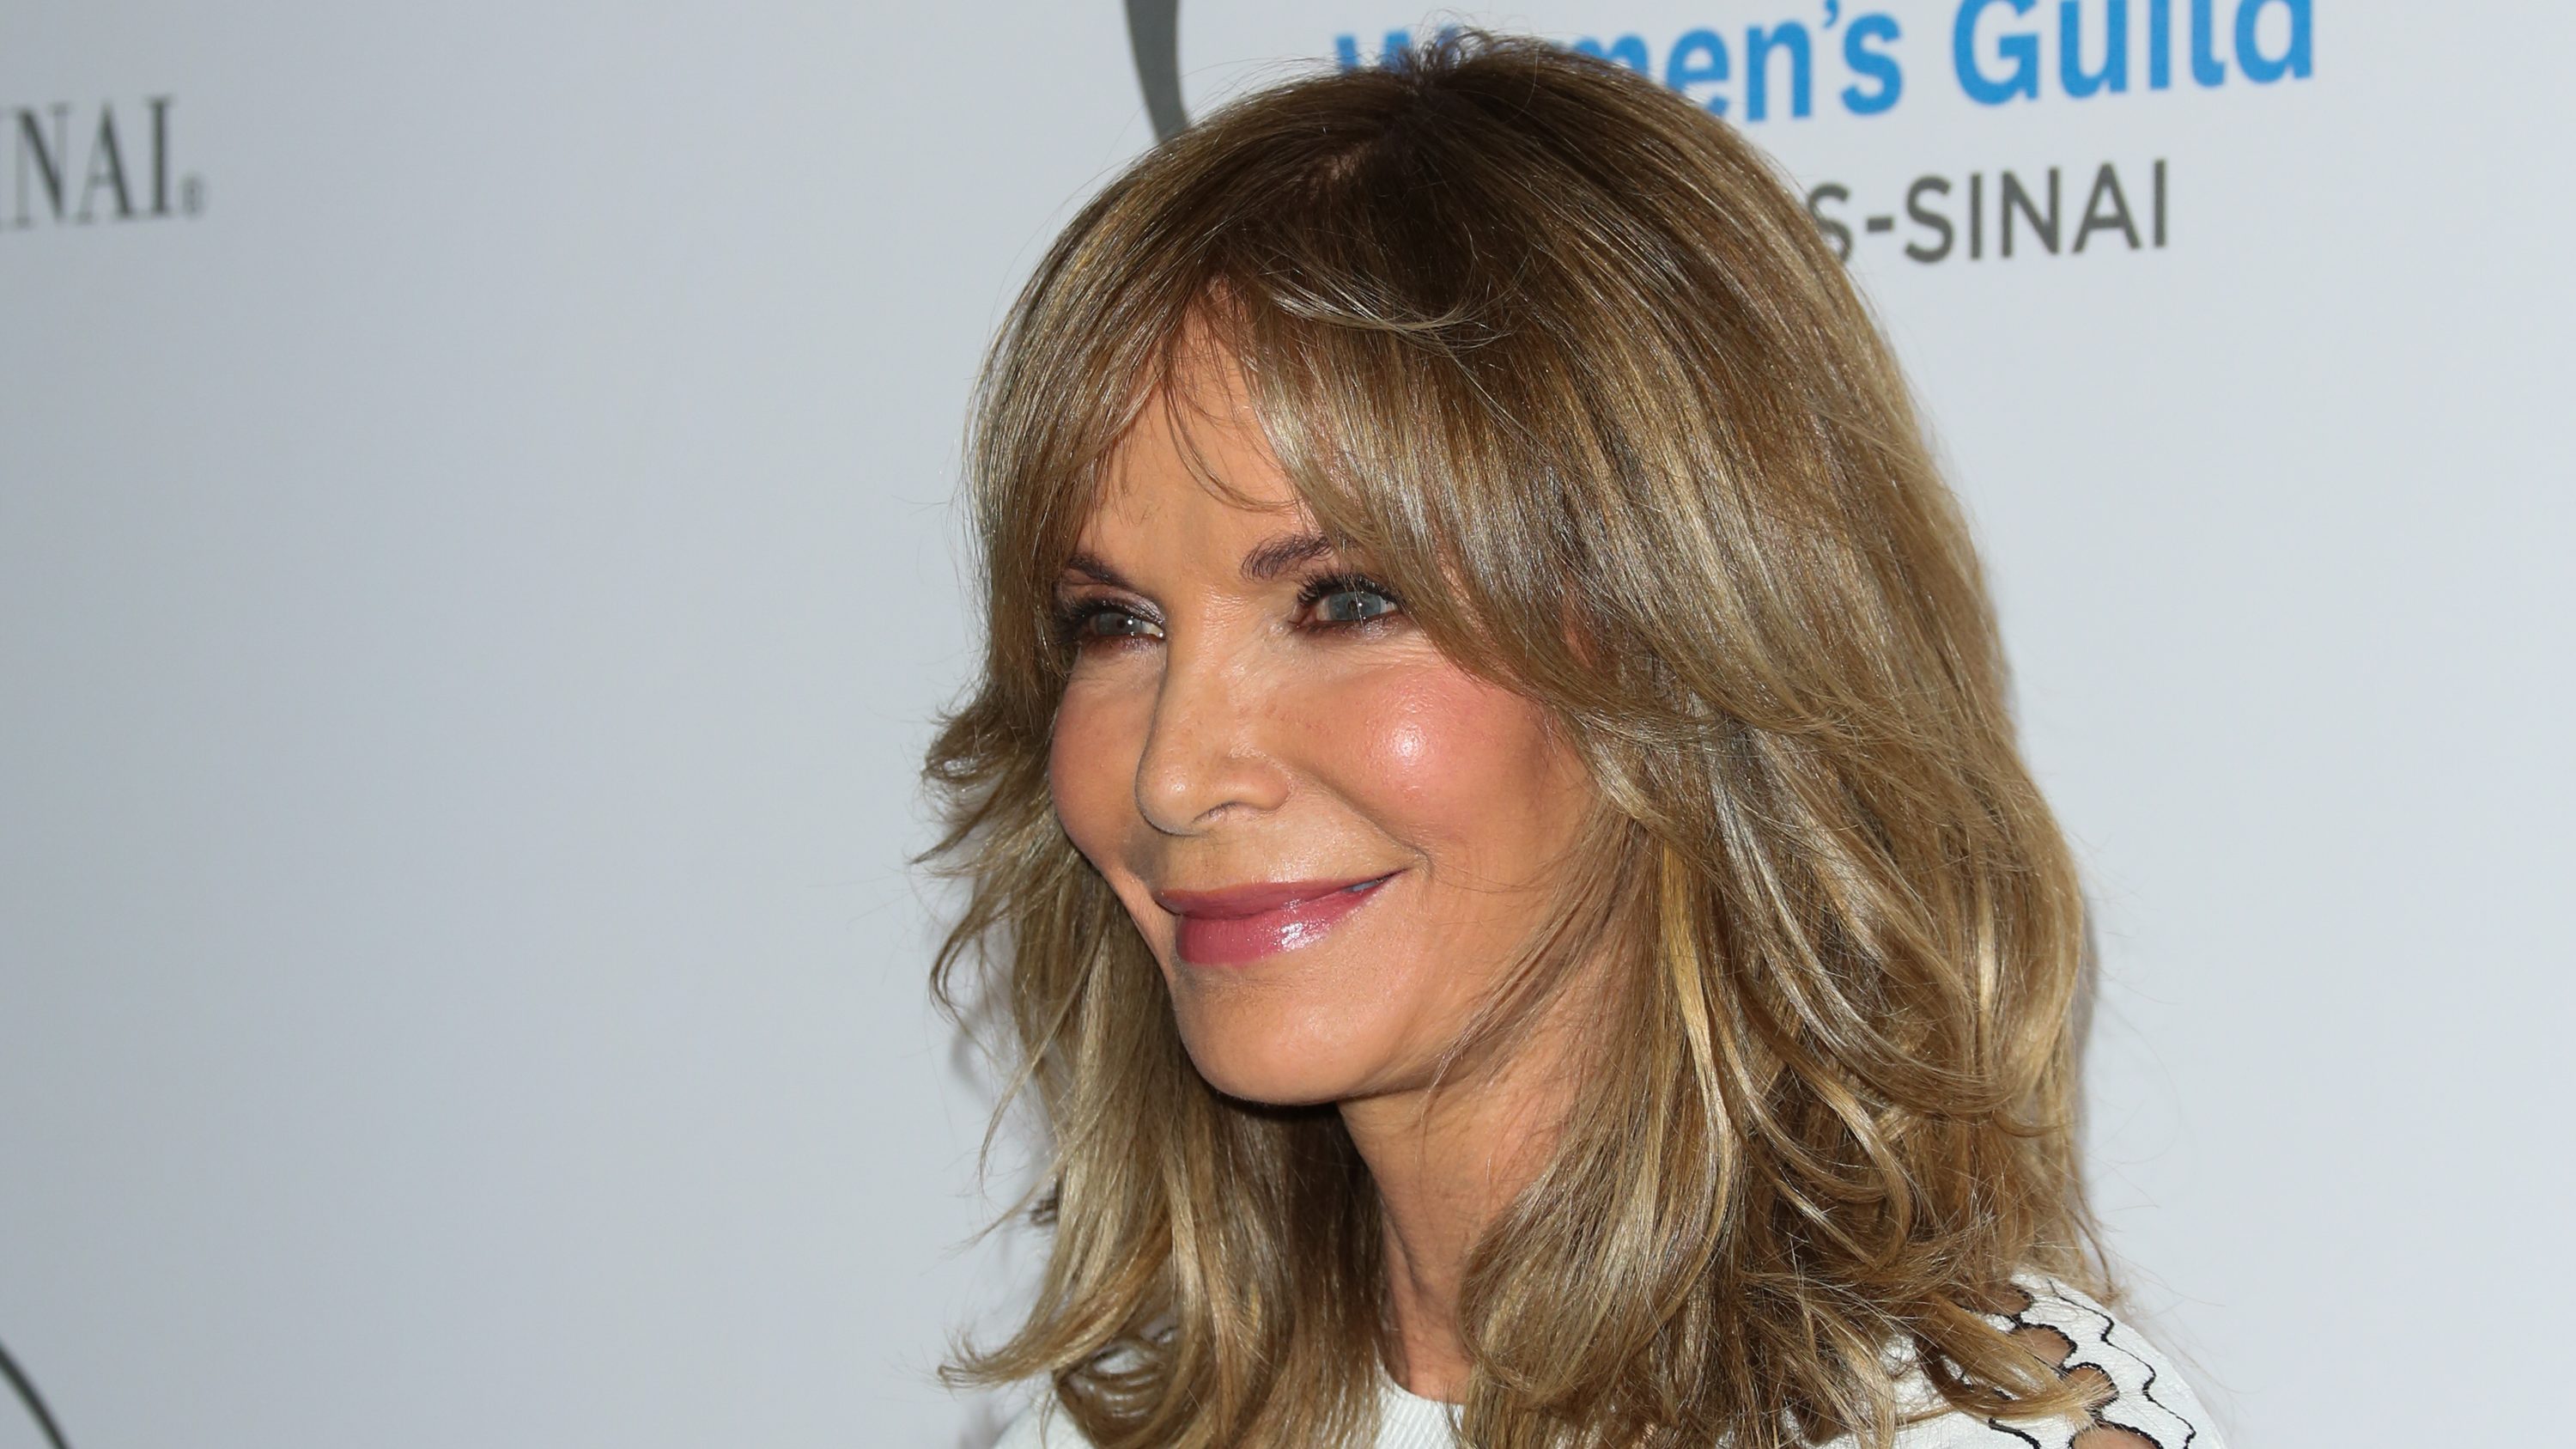 Today jaclyn smith photos What Jaclyn